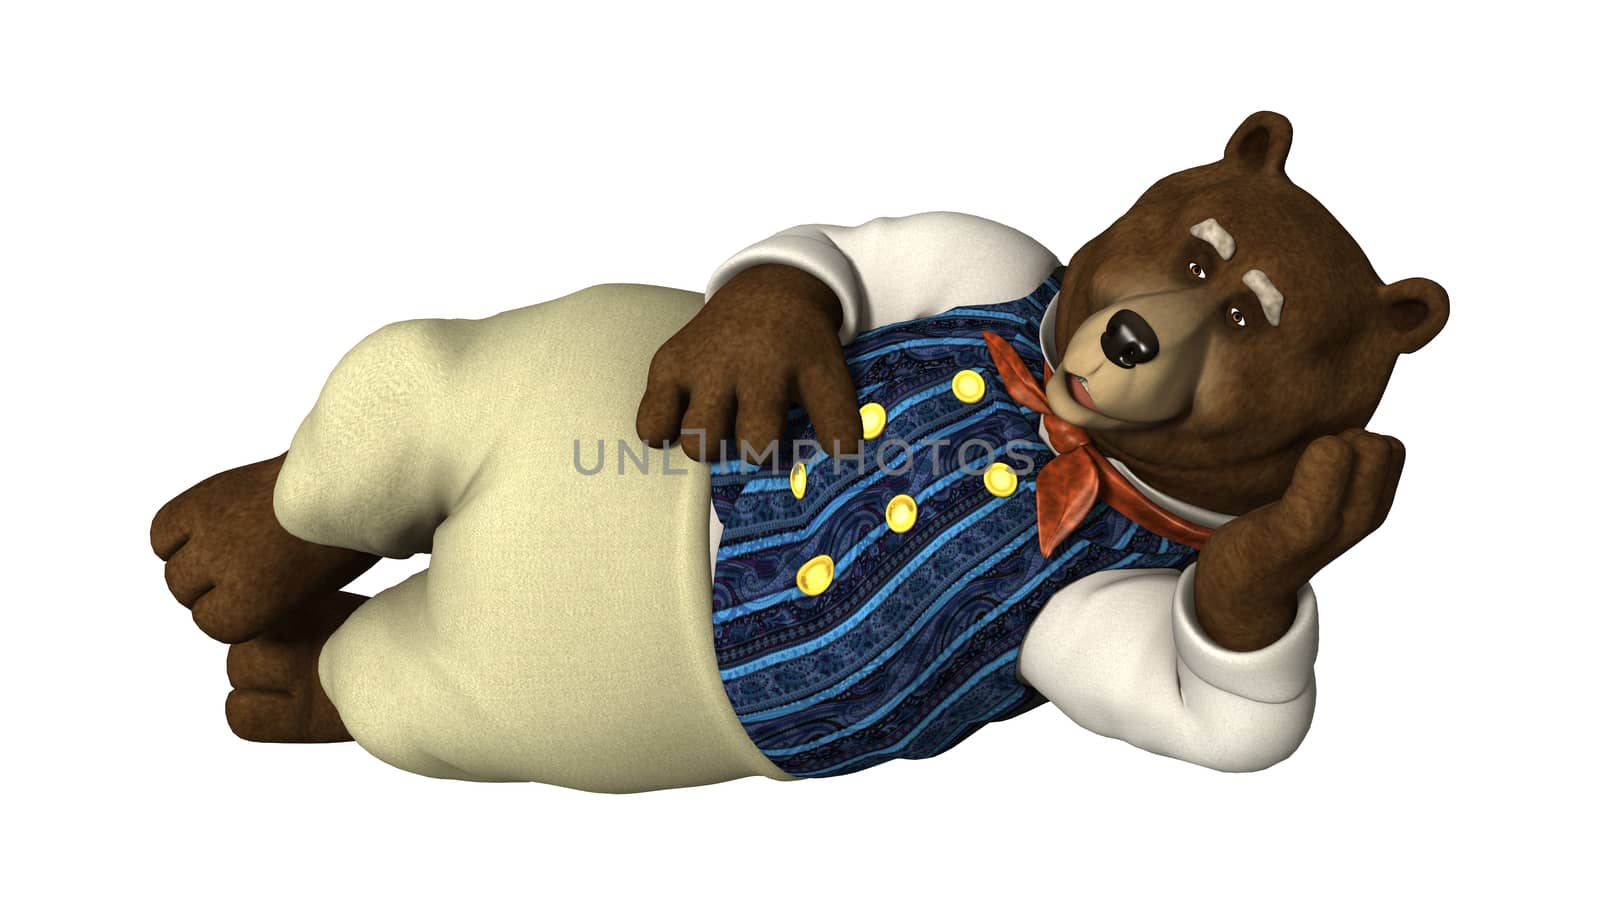 3D digital render of a fairytale bear resting isolated on white background